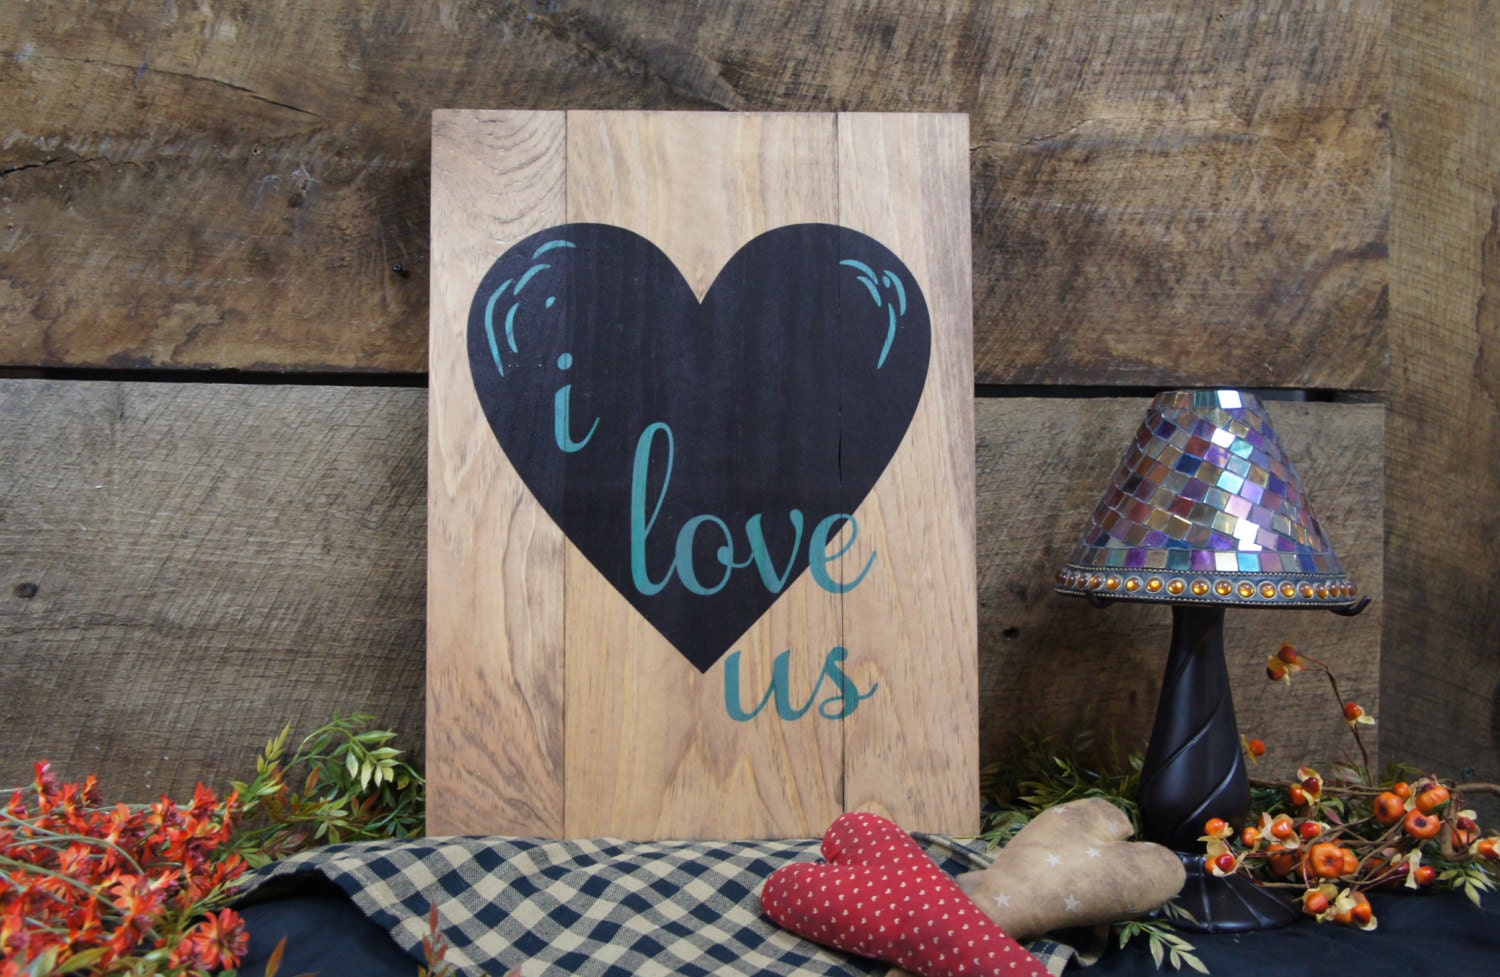 Rustic Style Love Sign I Love Us Black Heart All Wood Slat Pallet Sign , We Can Add Dates Names Change Wording Free Fast Shipping